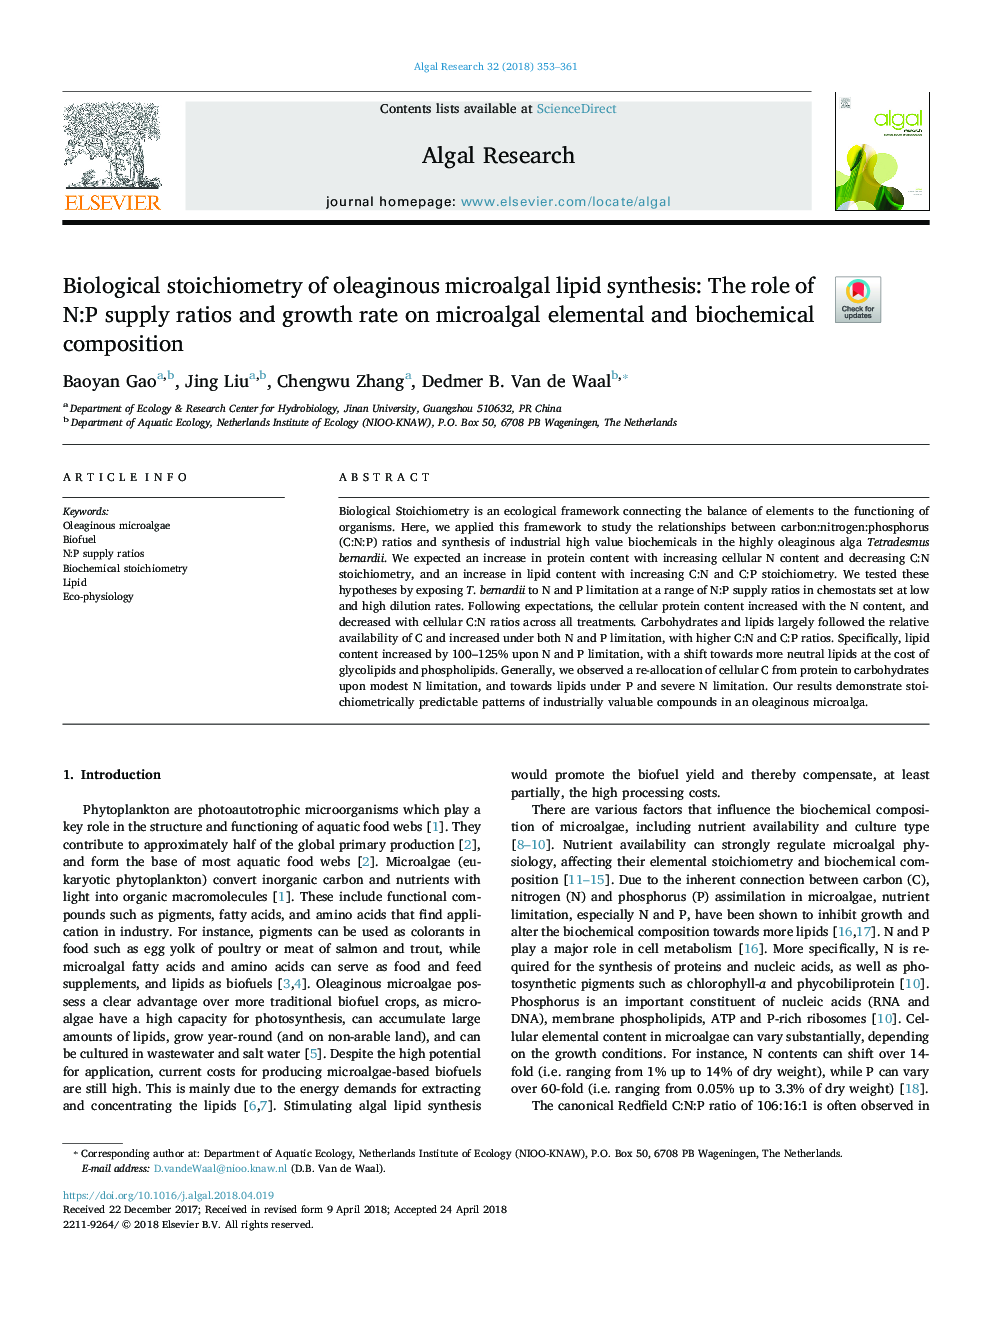 Biological stoichiometry of oleaginous microalgal lipid synthesis: The role of N:P supply ratios and growth rate on microalgal elemental and biochemical composition